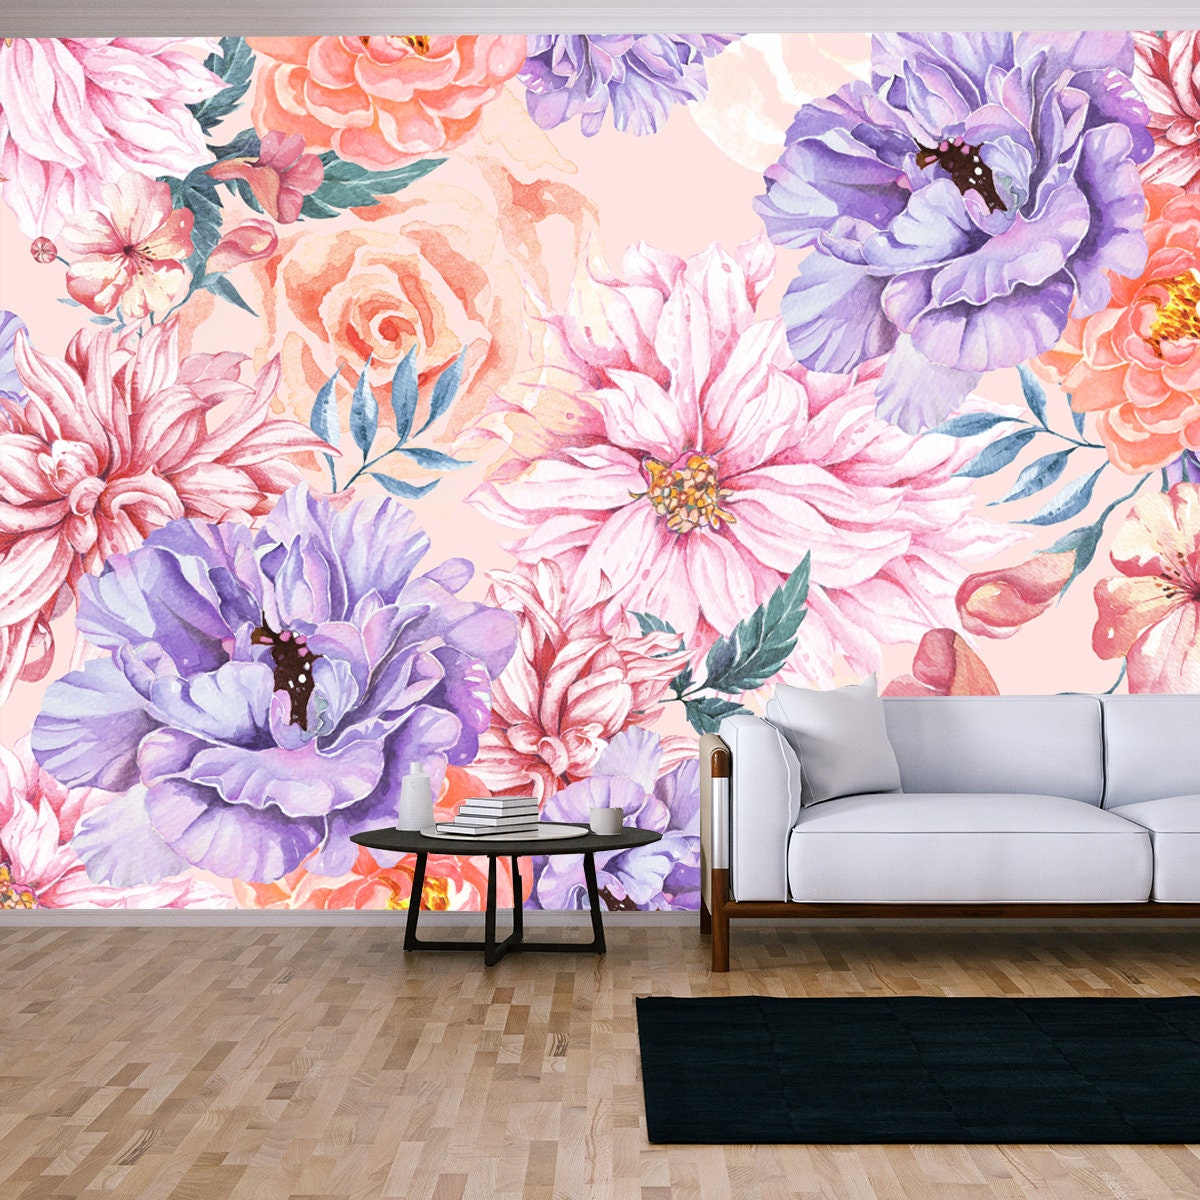 Pattern of Chrysanthemum, Rose, Peony and Blooming Flowers with Watercolor on Pastel Colors Wallpaper Living Room Mural